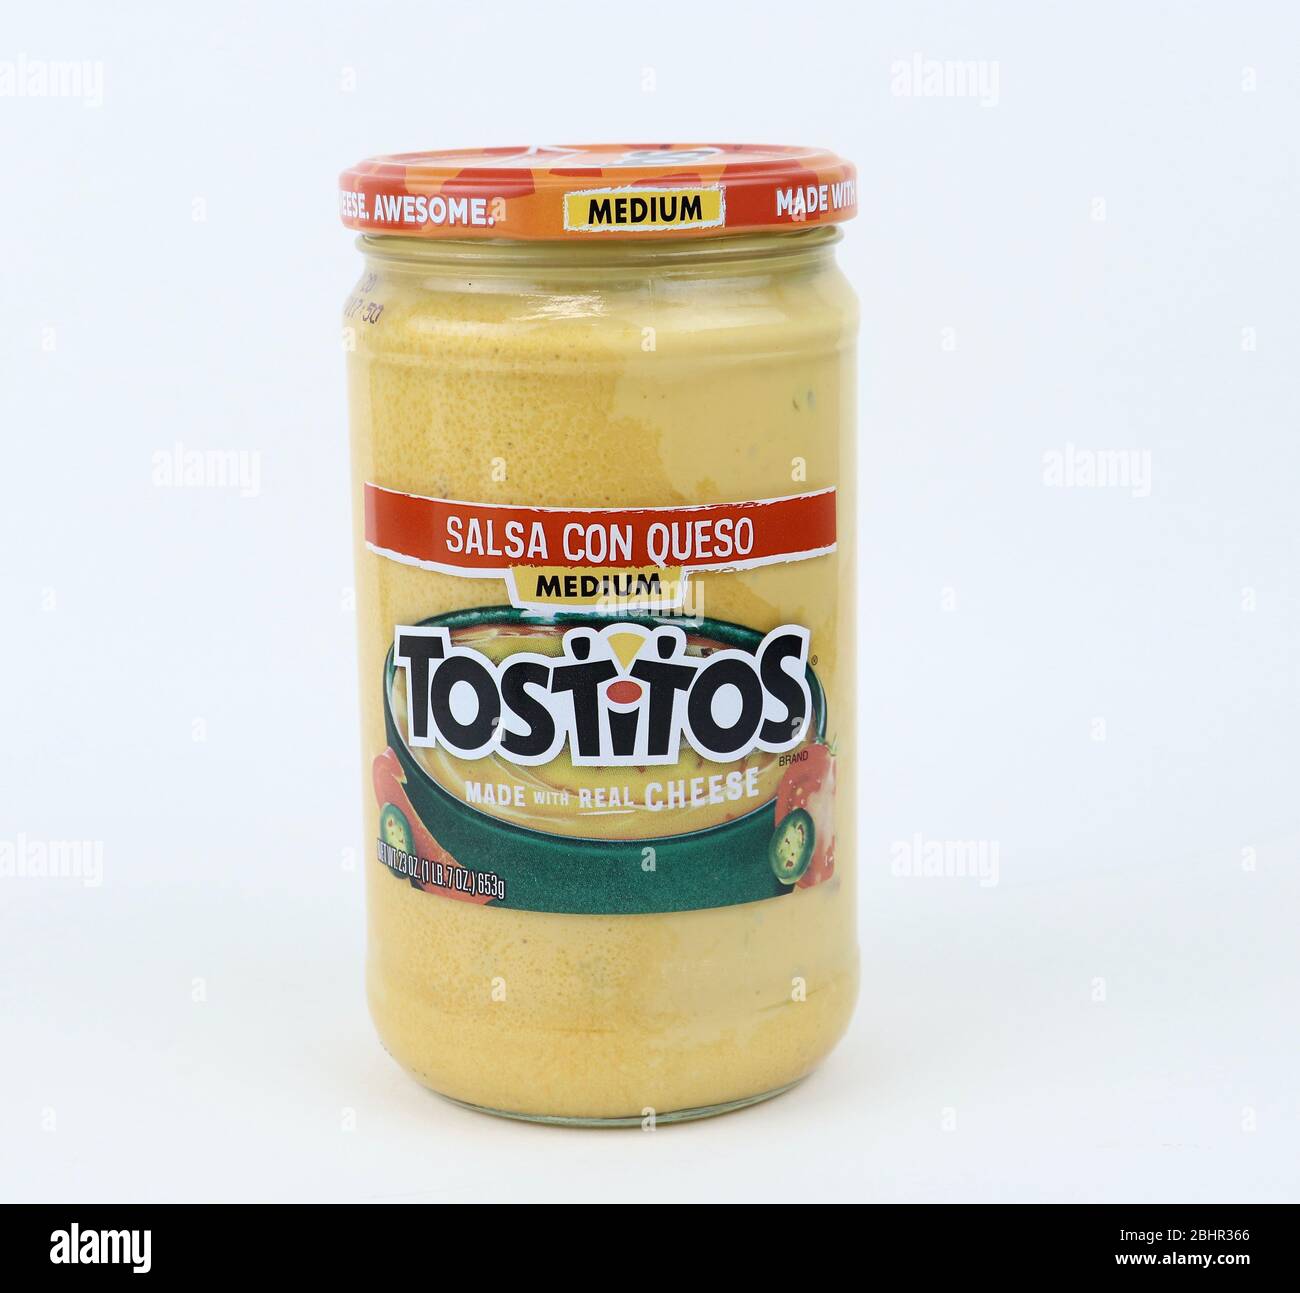 Spencer, Wisconsin, U.S.A., April, 27, 2020   Jar of Tostitos Medium Cheese Salsa   Tostitos is an American product first introduced in 1979 Stock Photo